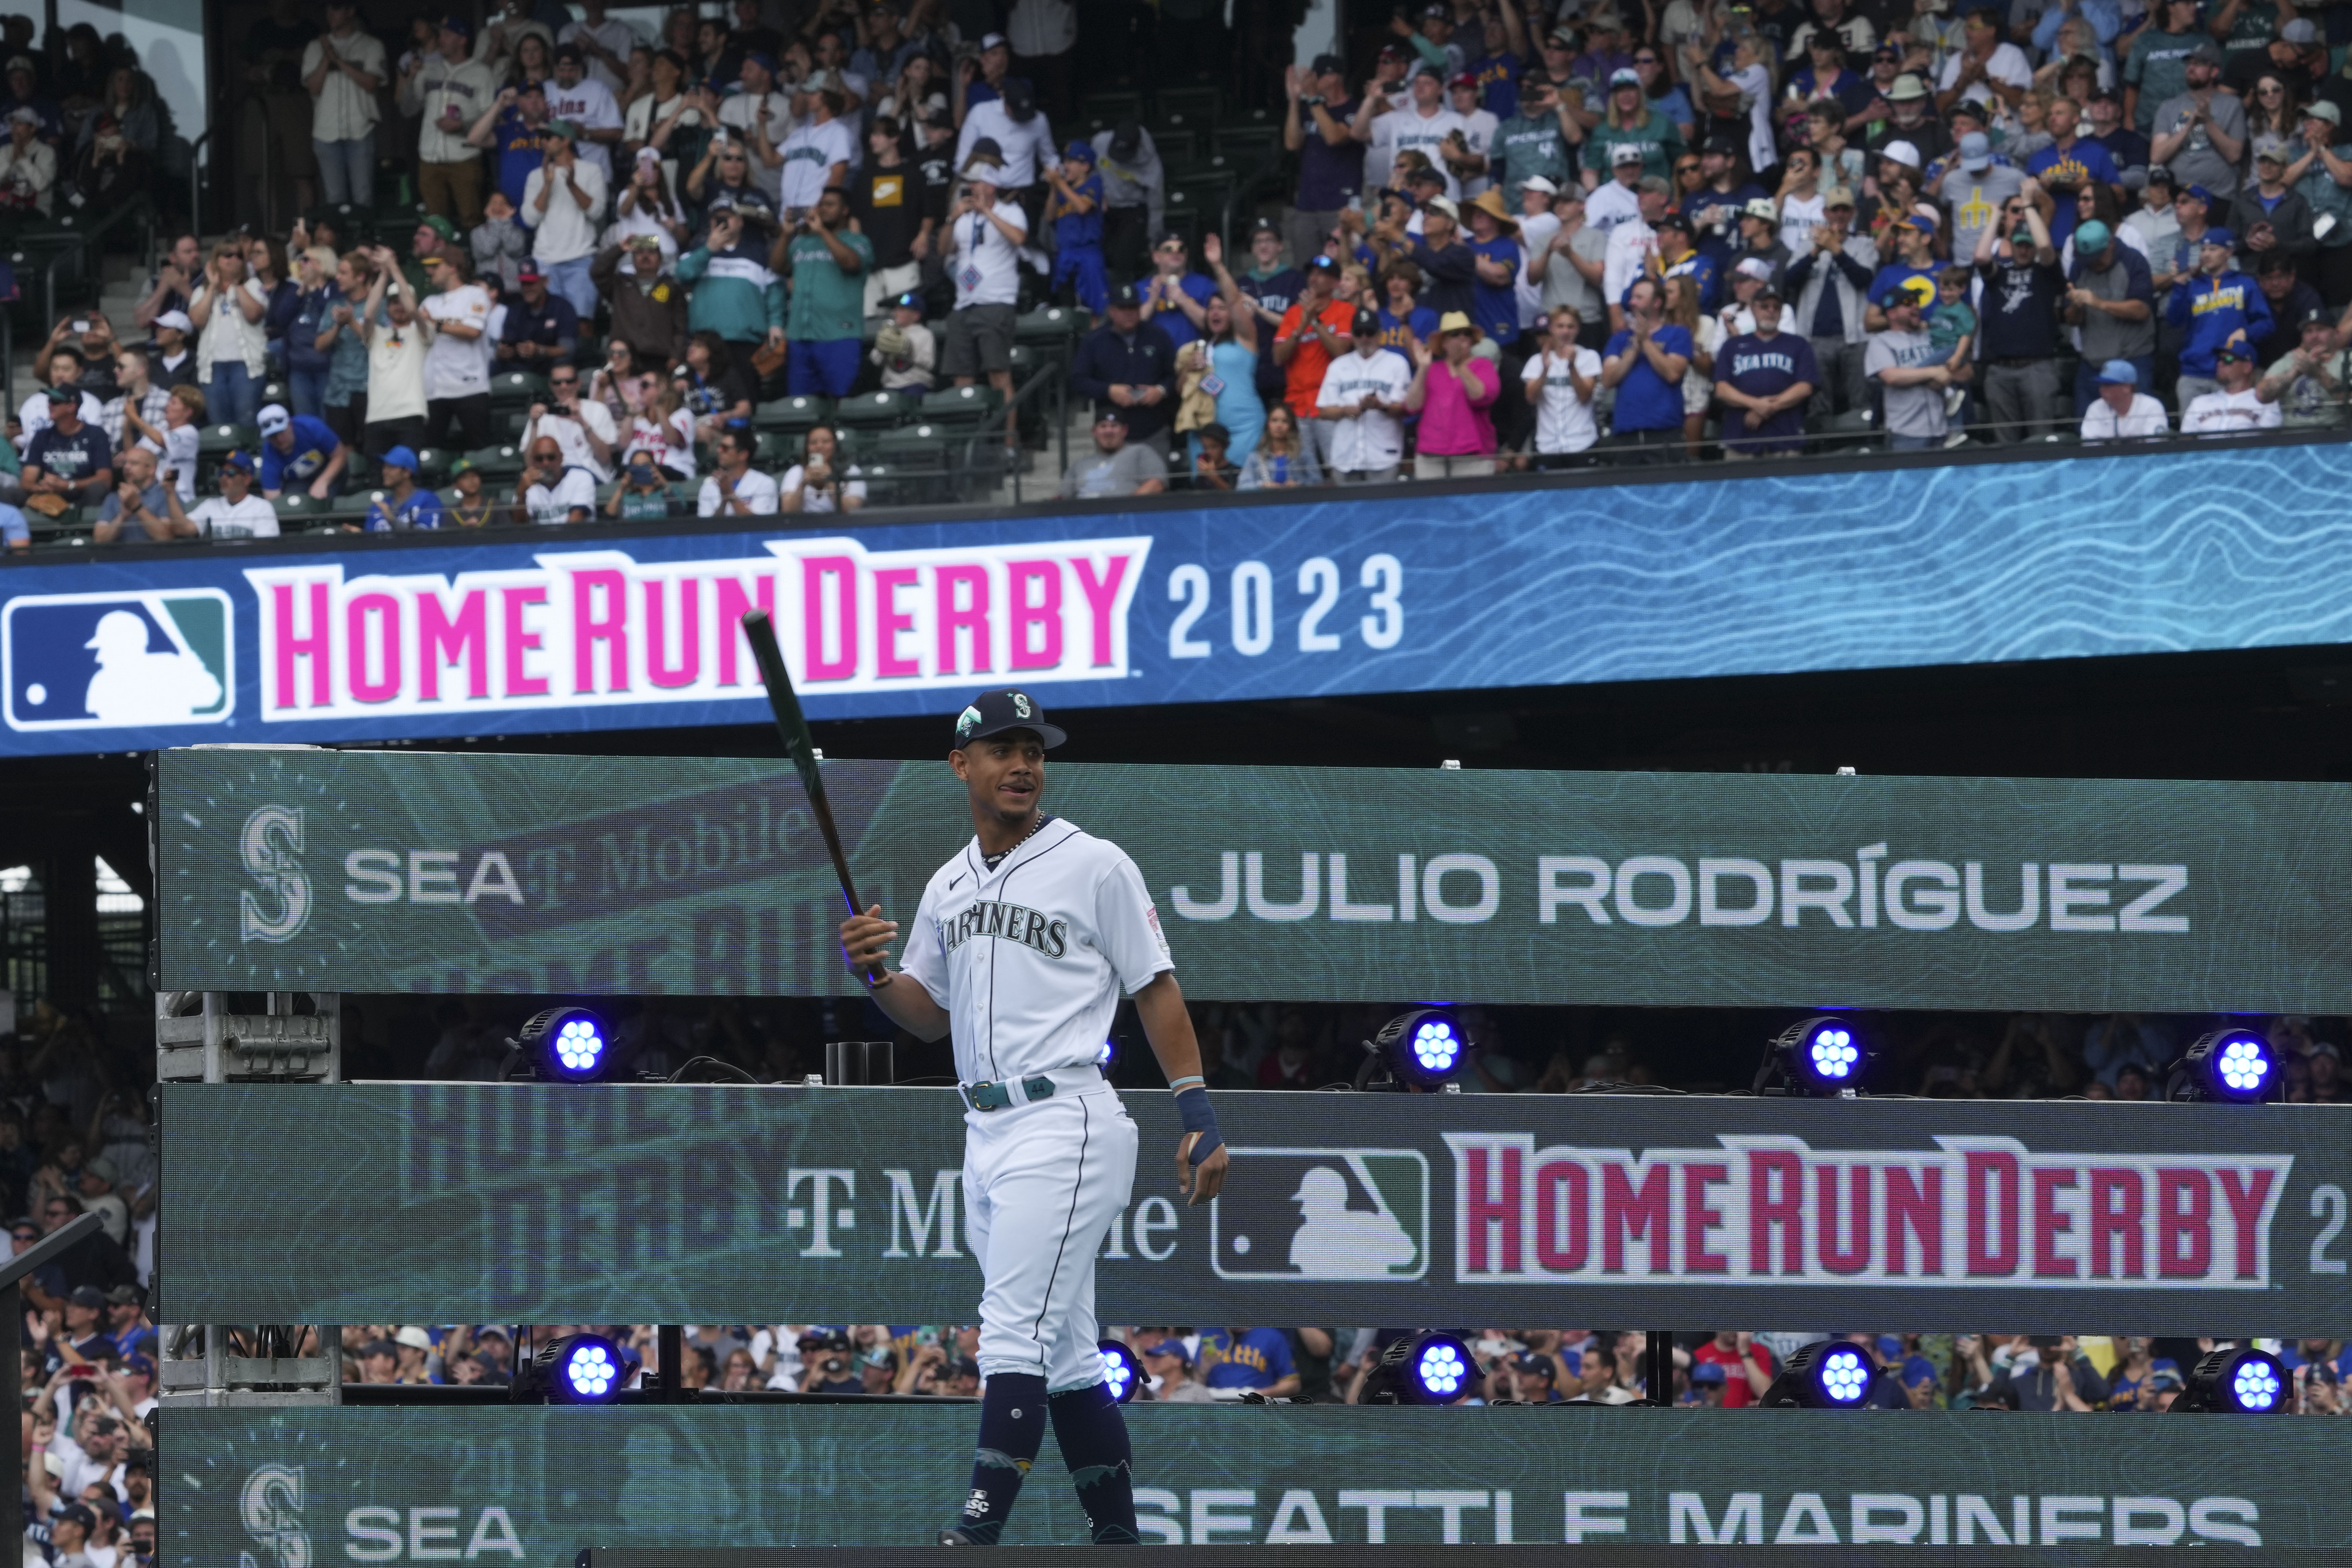 Photo: 2023 MLB Home Run Derby at T-Mobile Park in Seattle - SEA20230710539  